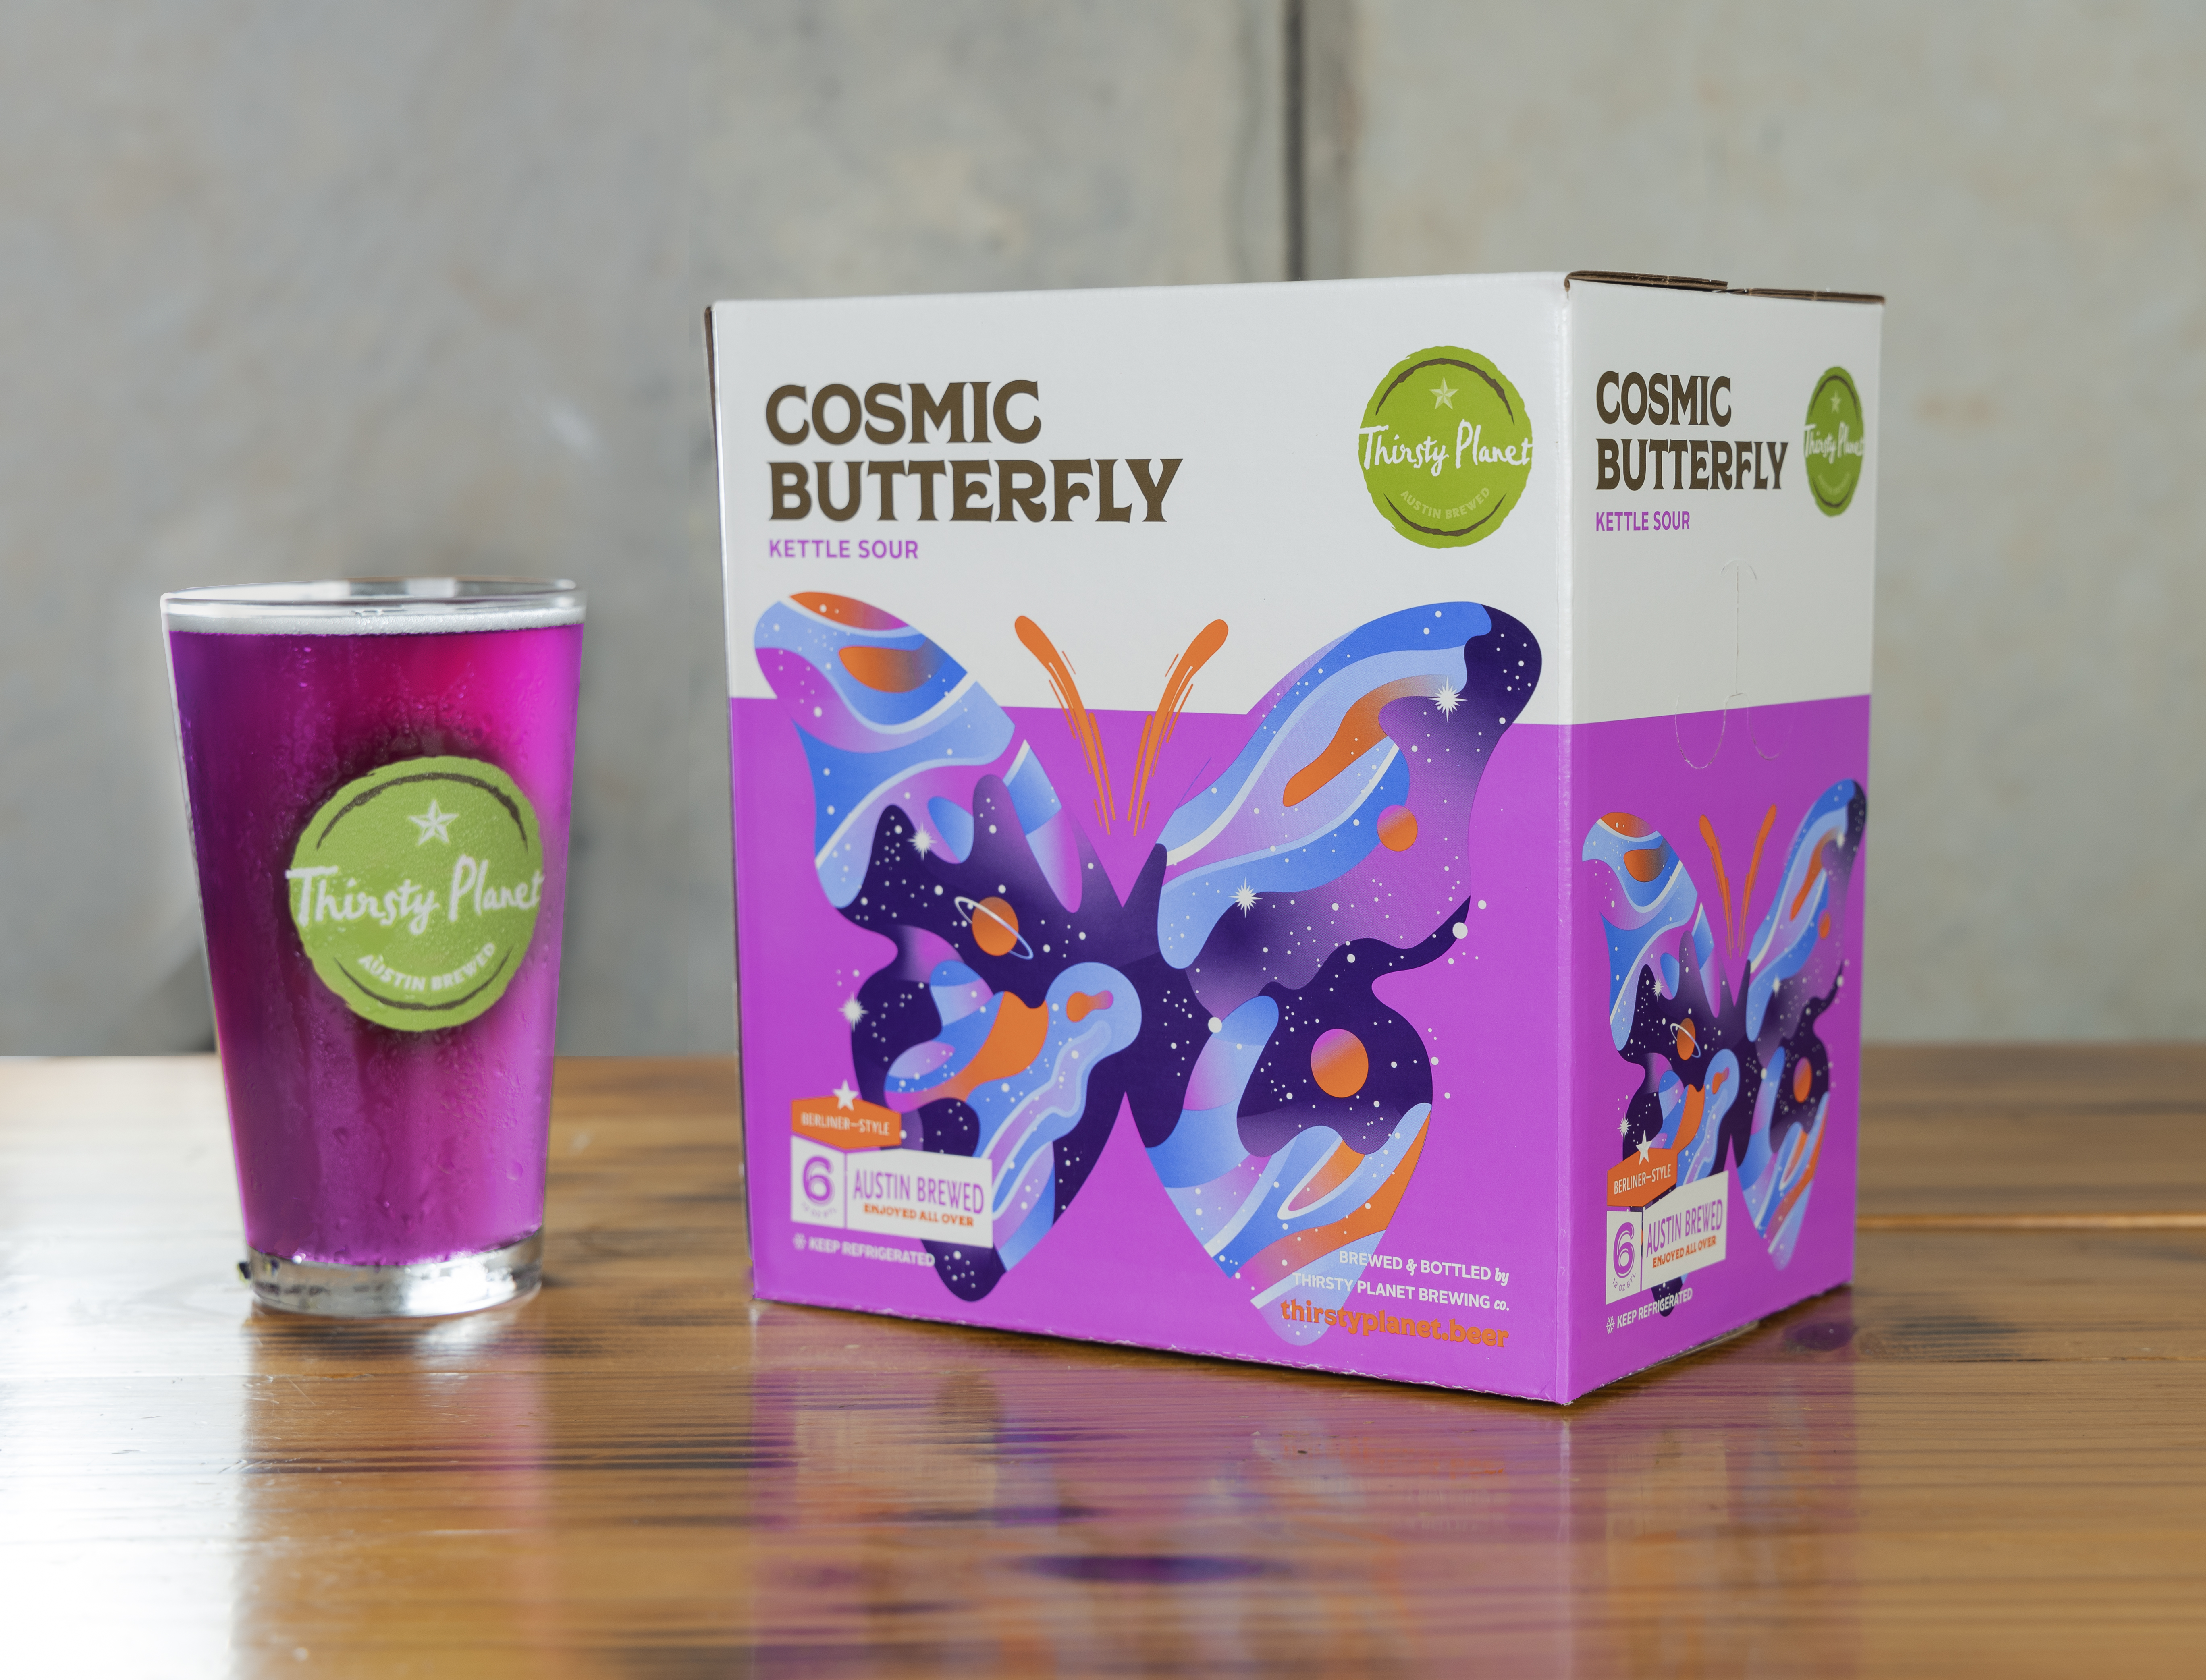 Thirsty Planet’s Cosmic Butterfly beer